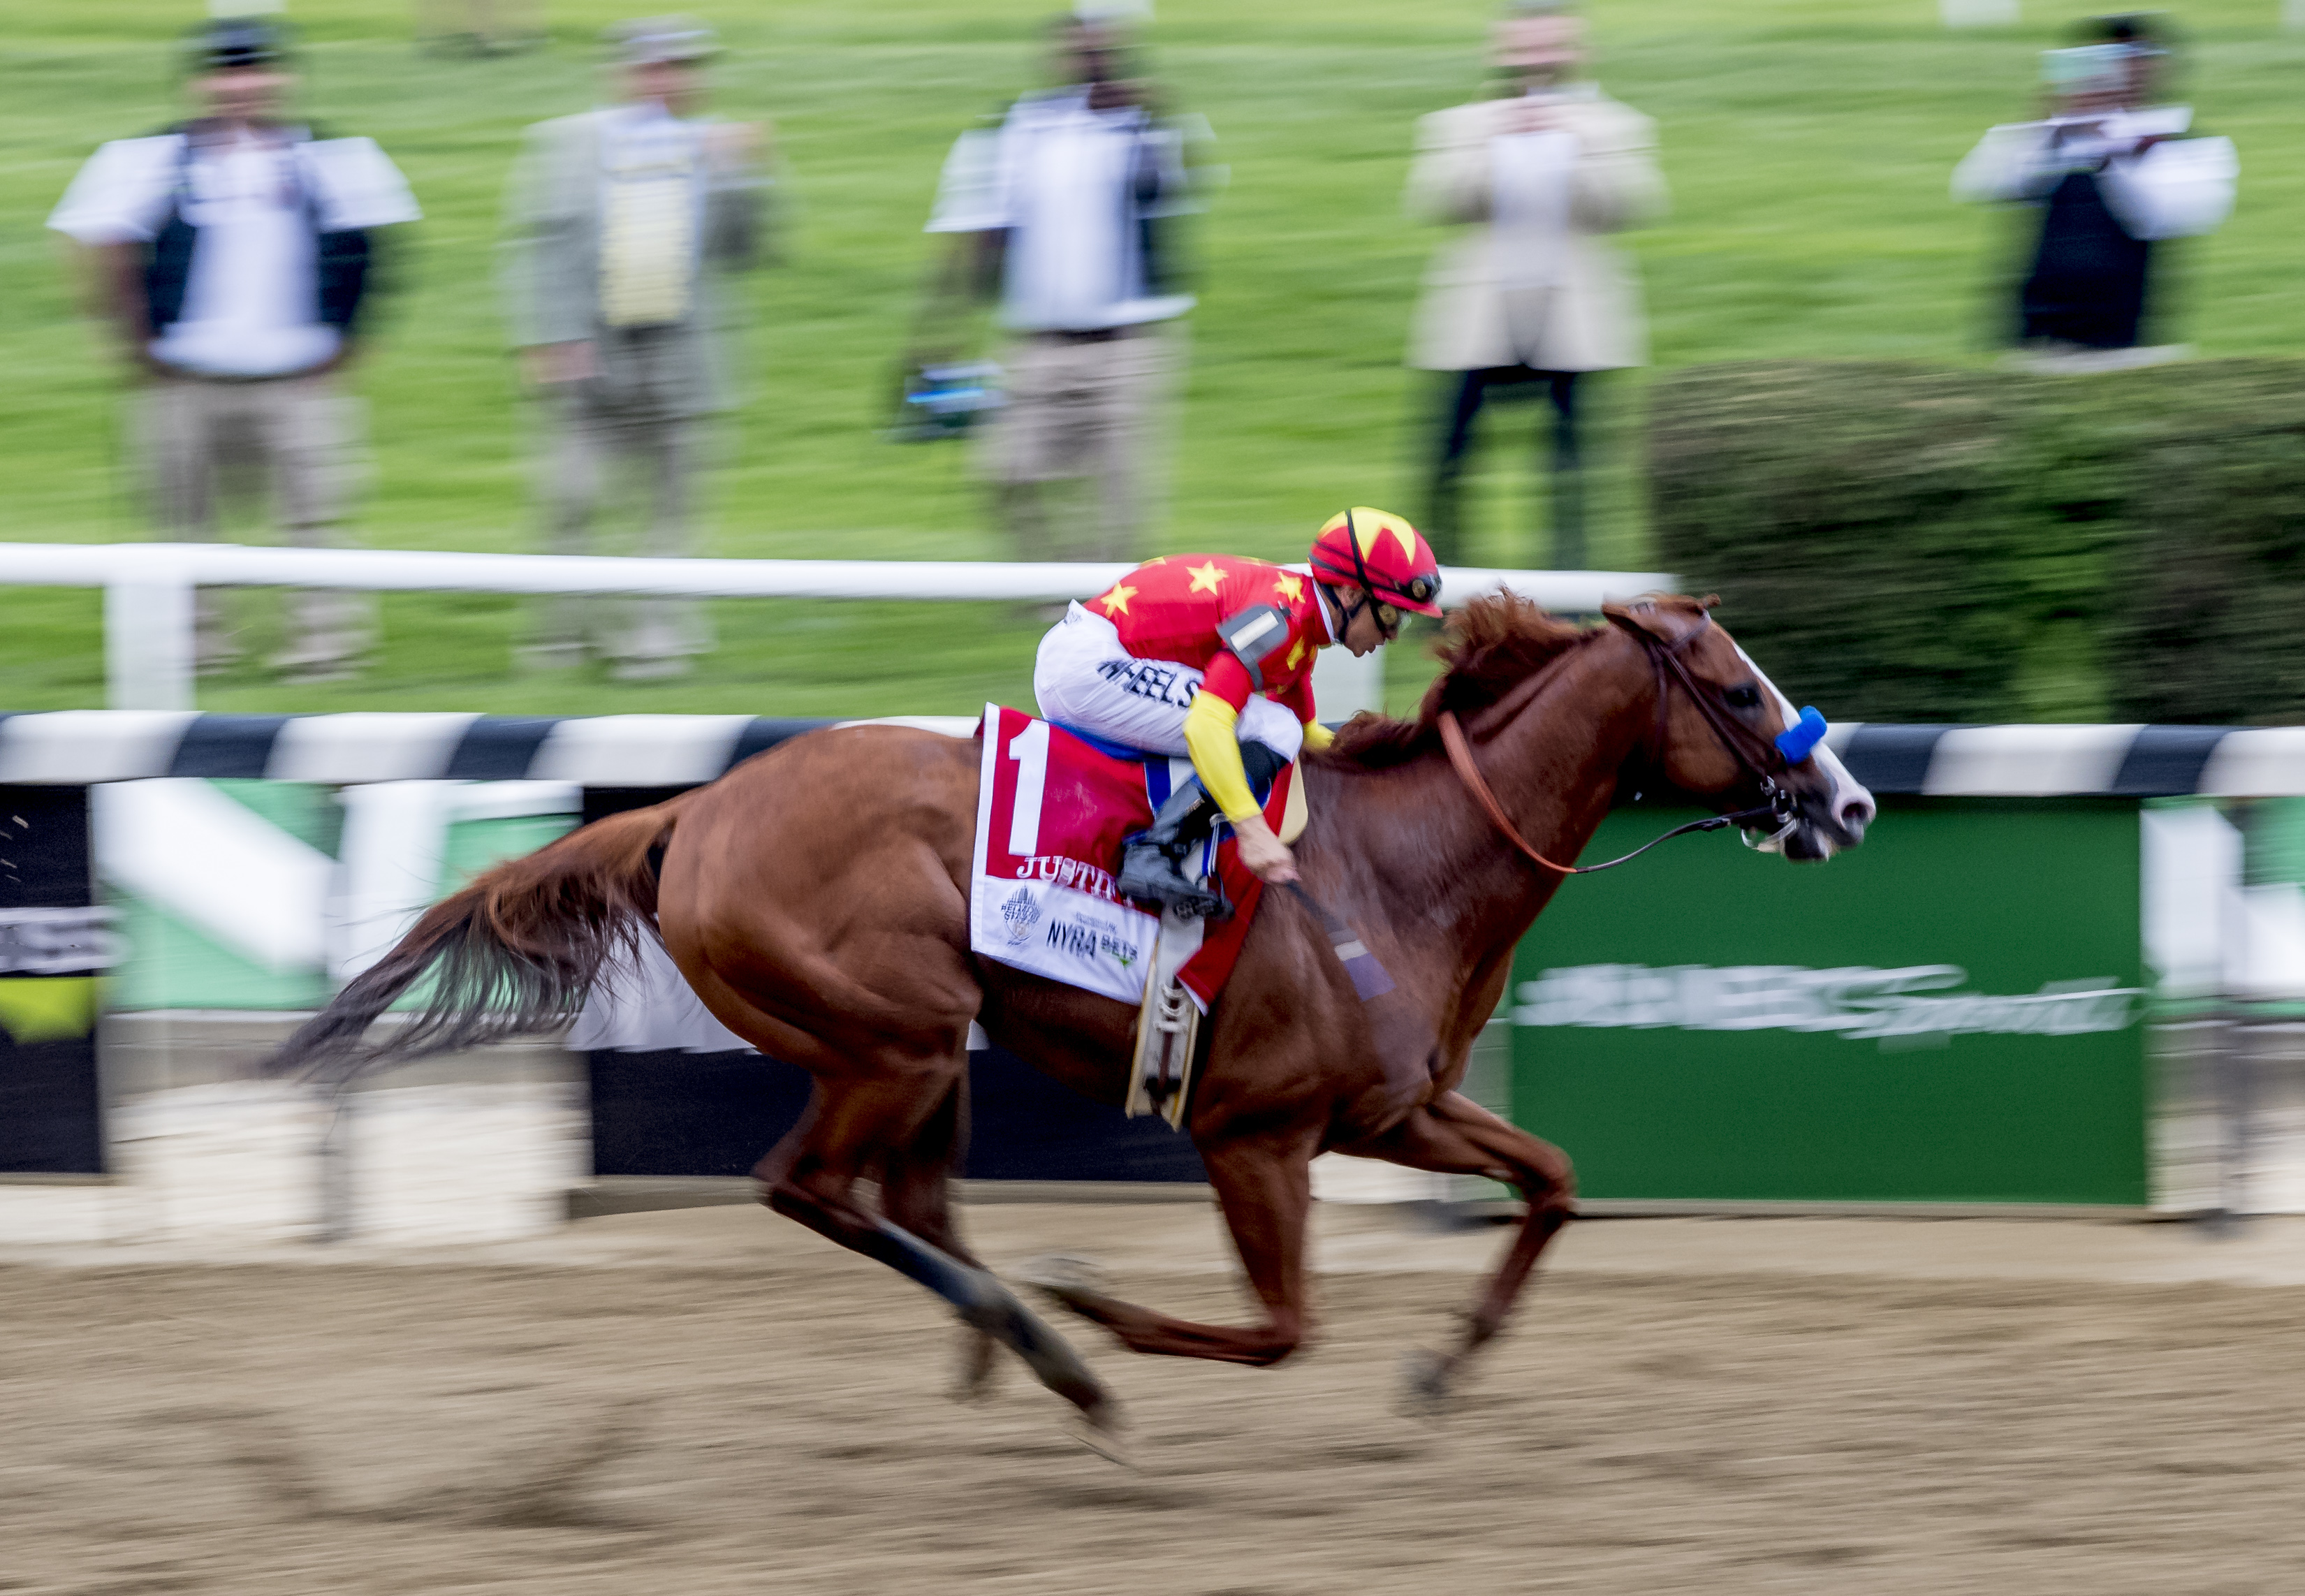 Justify #1, ridden by Mike Smith, wins the Belmont Stakes on Belmont Stakes Day at Belmont Park on June 9, 2018 in Elmont, New York (Eclipse Sportswire—Getty Images)